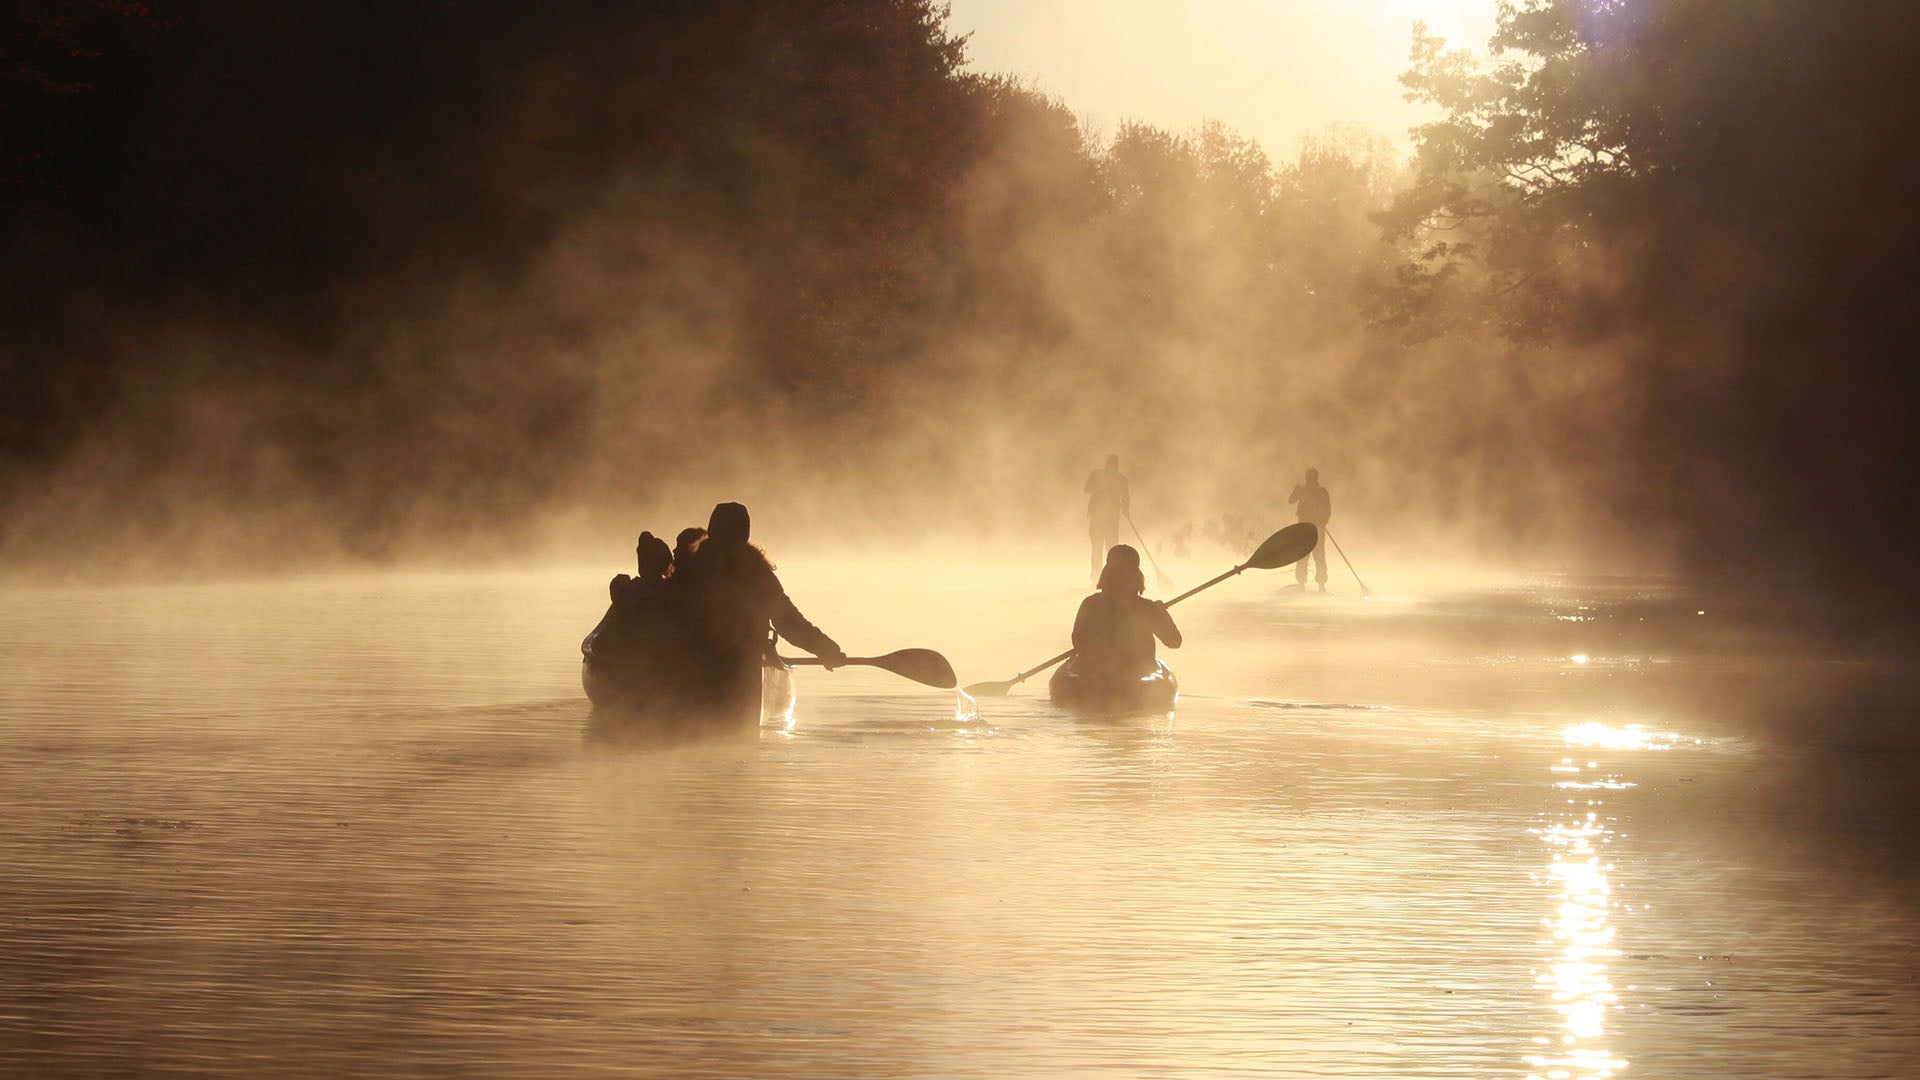 Sunrise paddling in Maine can be magical.Kristel Hayes